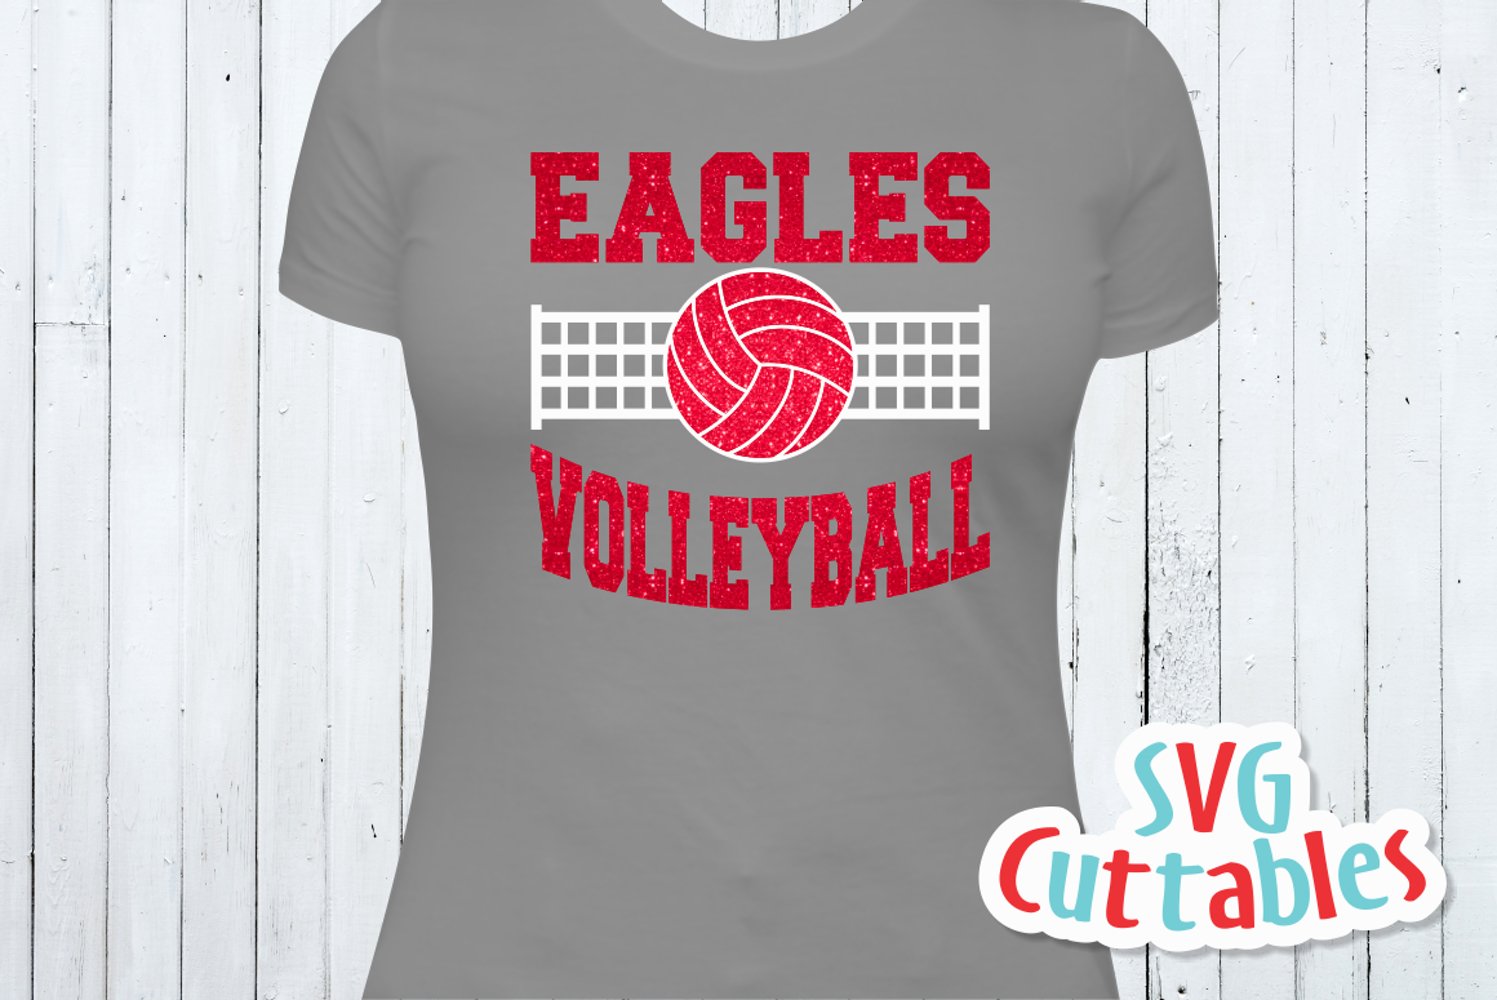 Grey t-shirt design for volleyball team.